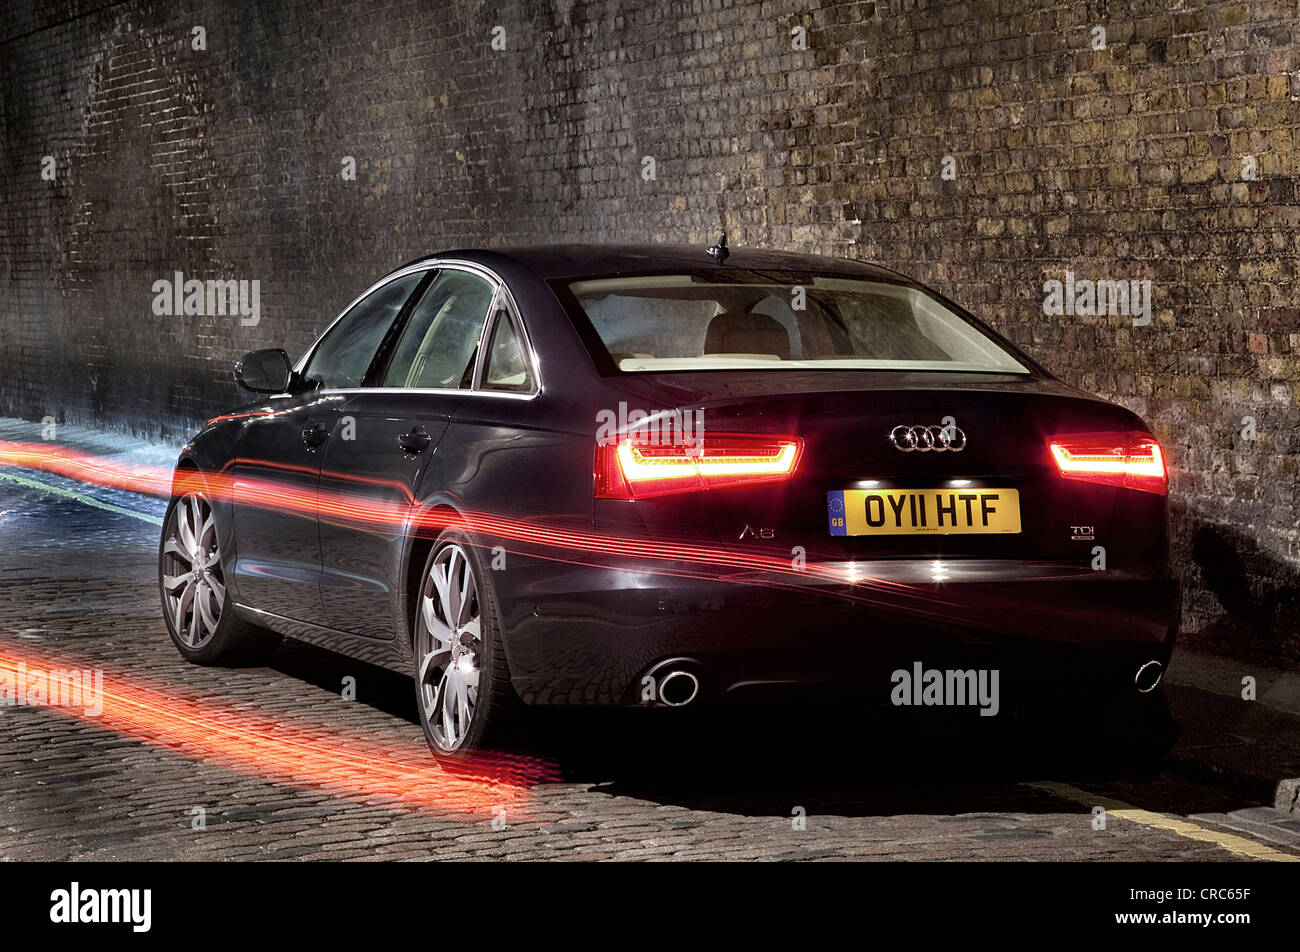 Audi A6 Quattro. in a London street at night Stock Photo